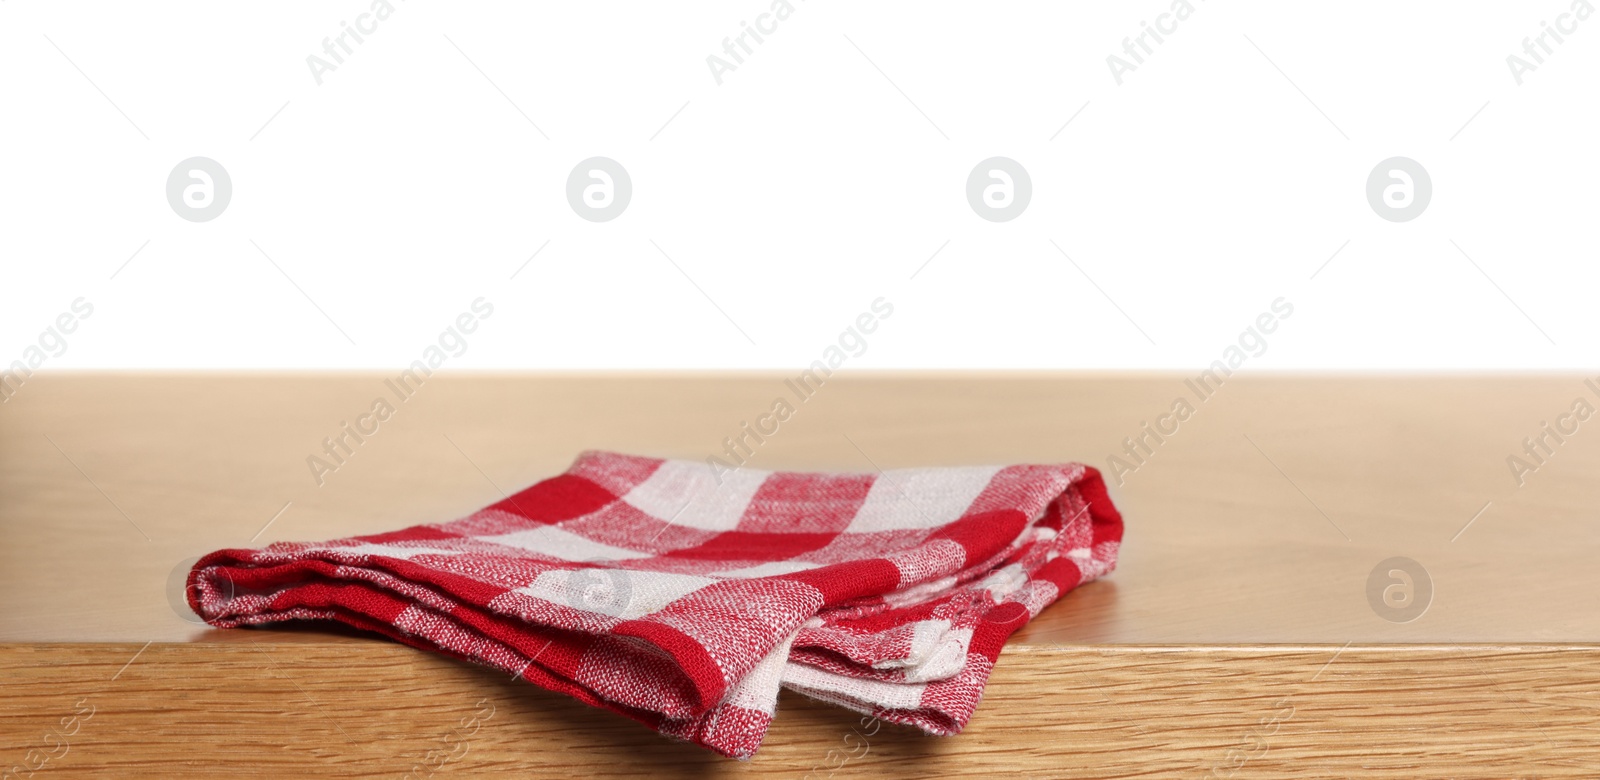 Photo of Checkered tablecloth on wooden table against white background